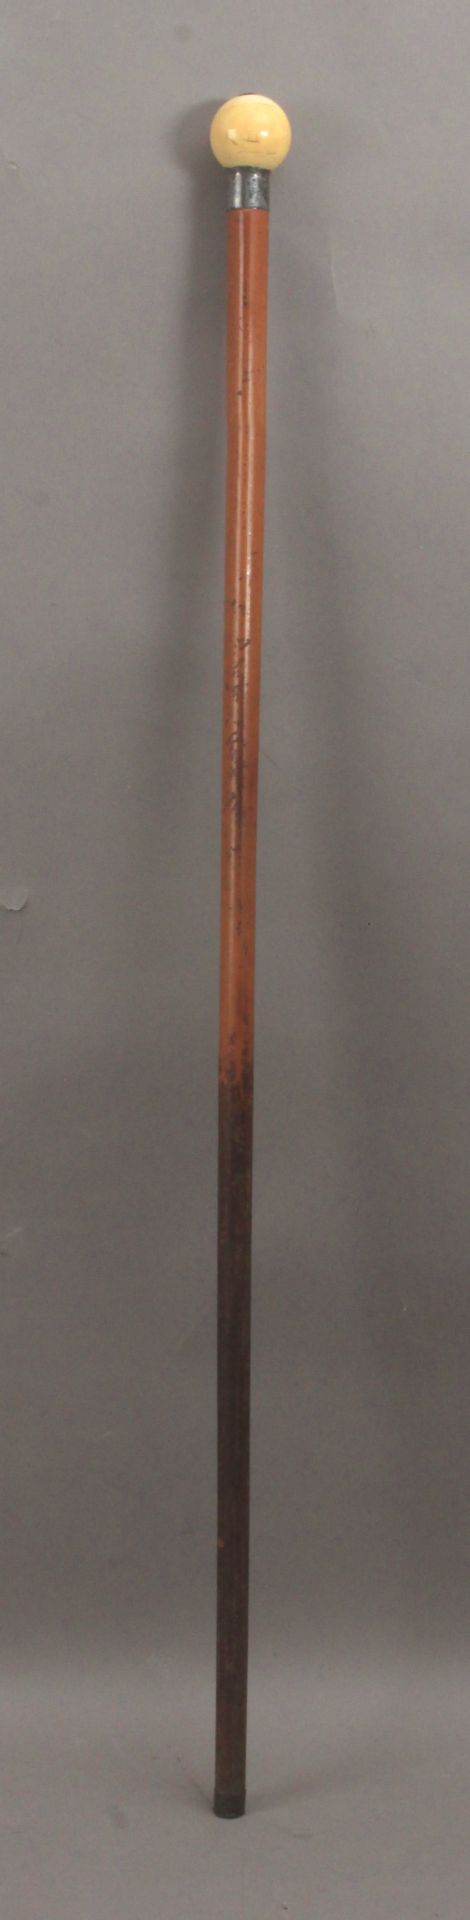 A 20th century walking cane - Image 6 of 6